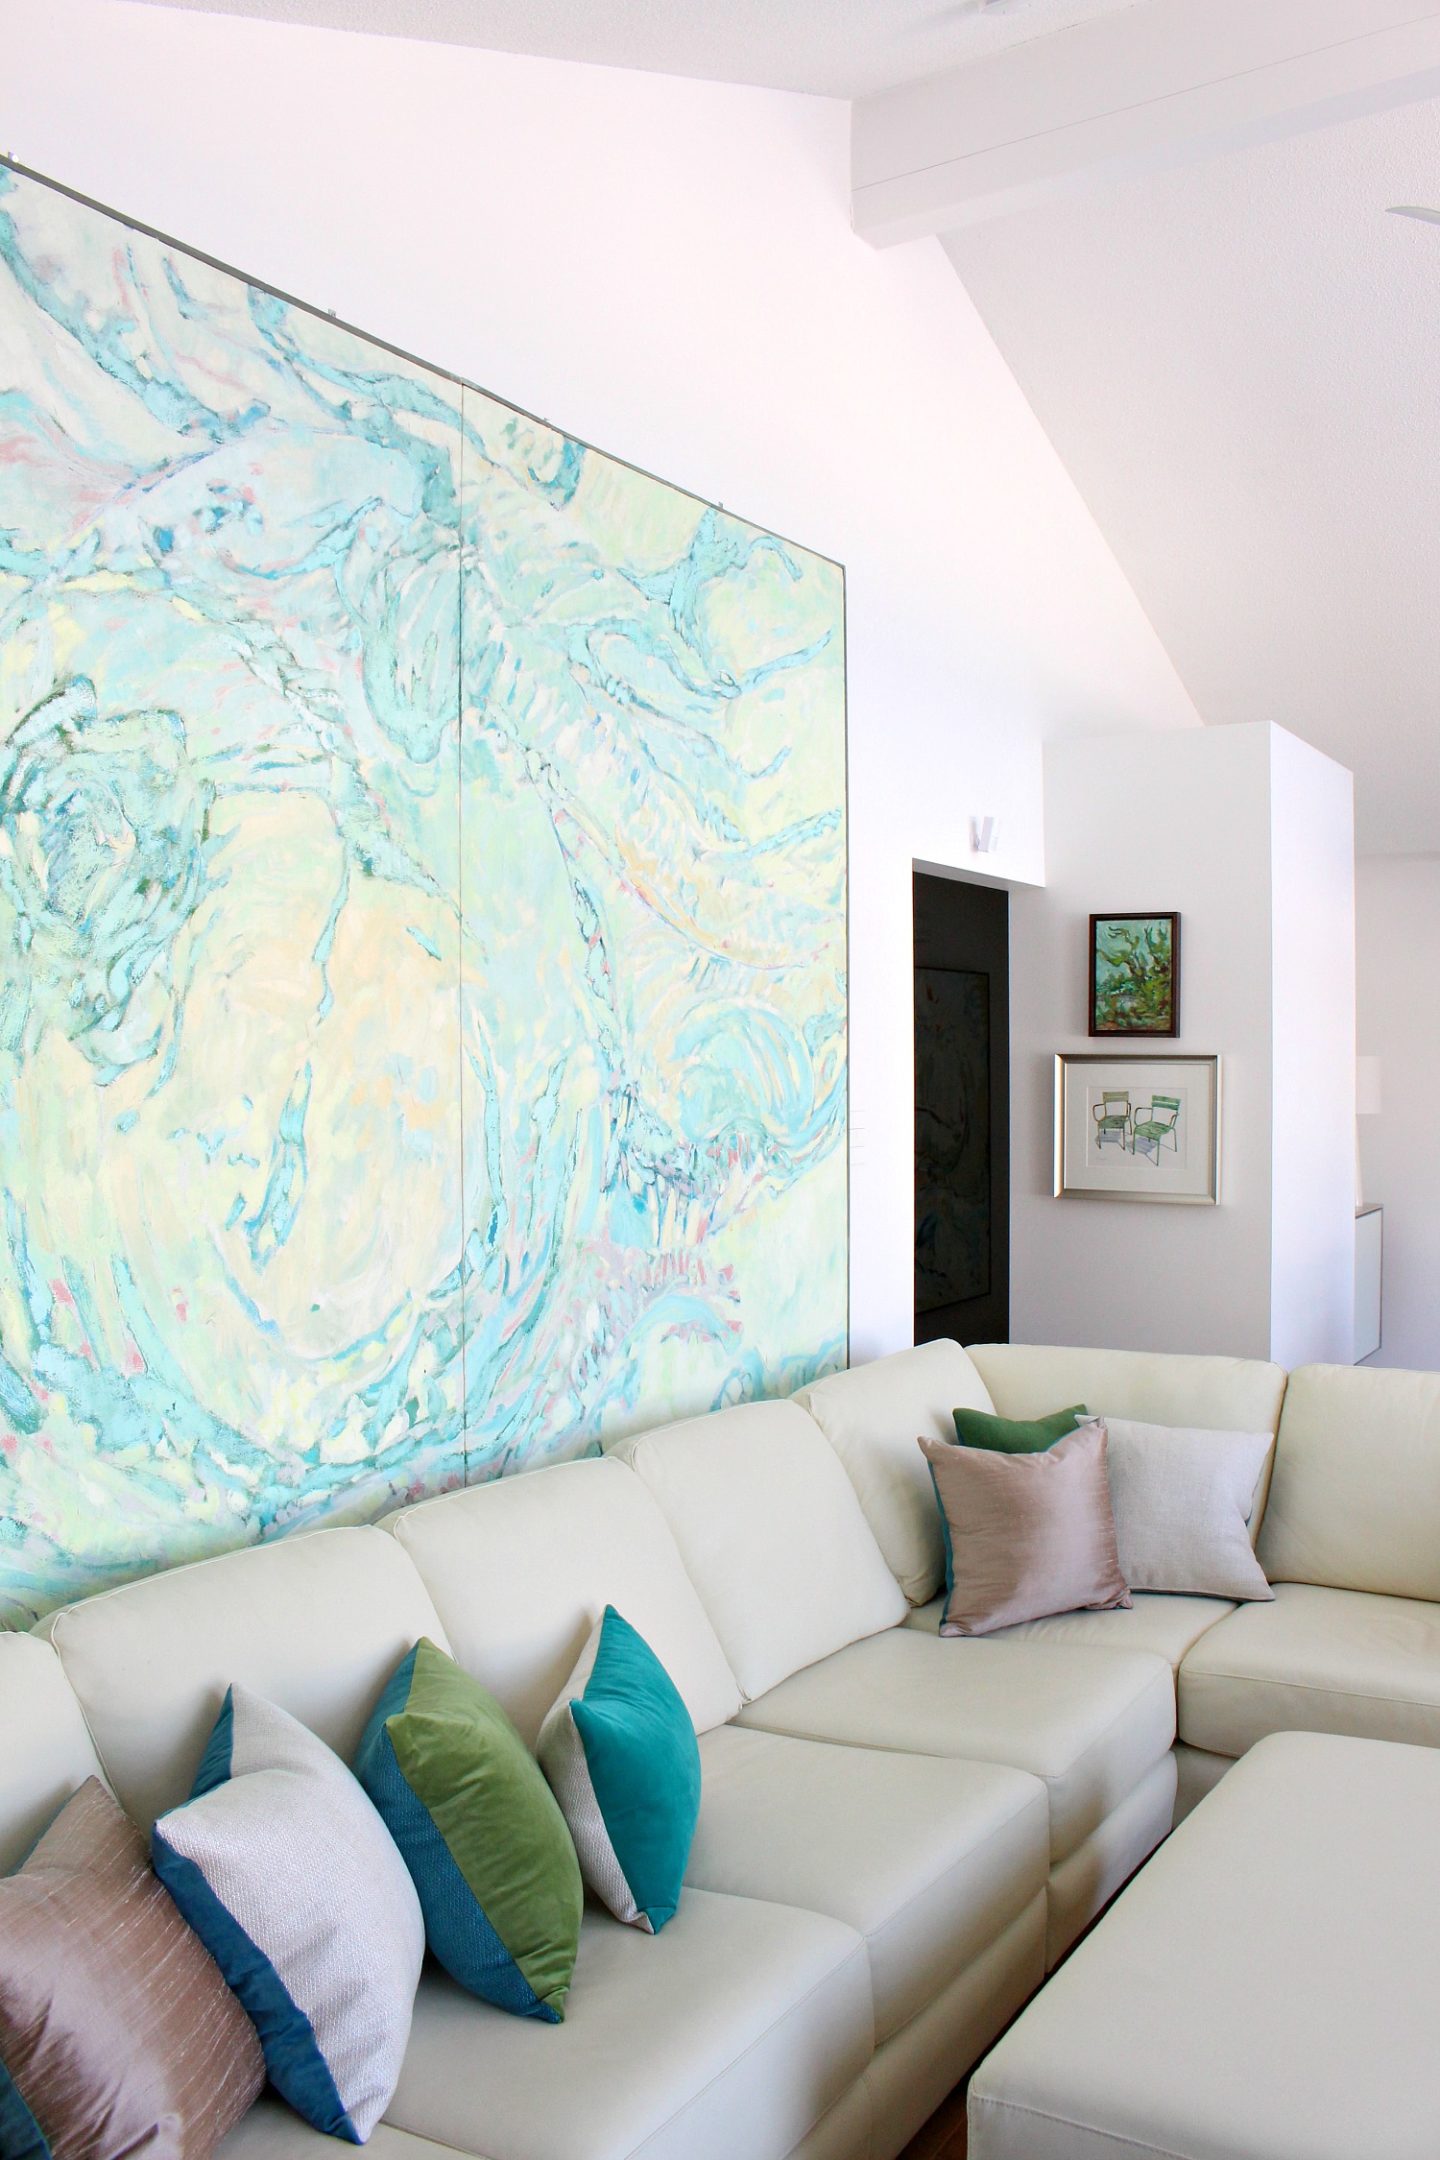 How to Hang Large Art + How to Put a Sofa in Front of Art Without Causing Damage